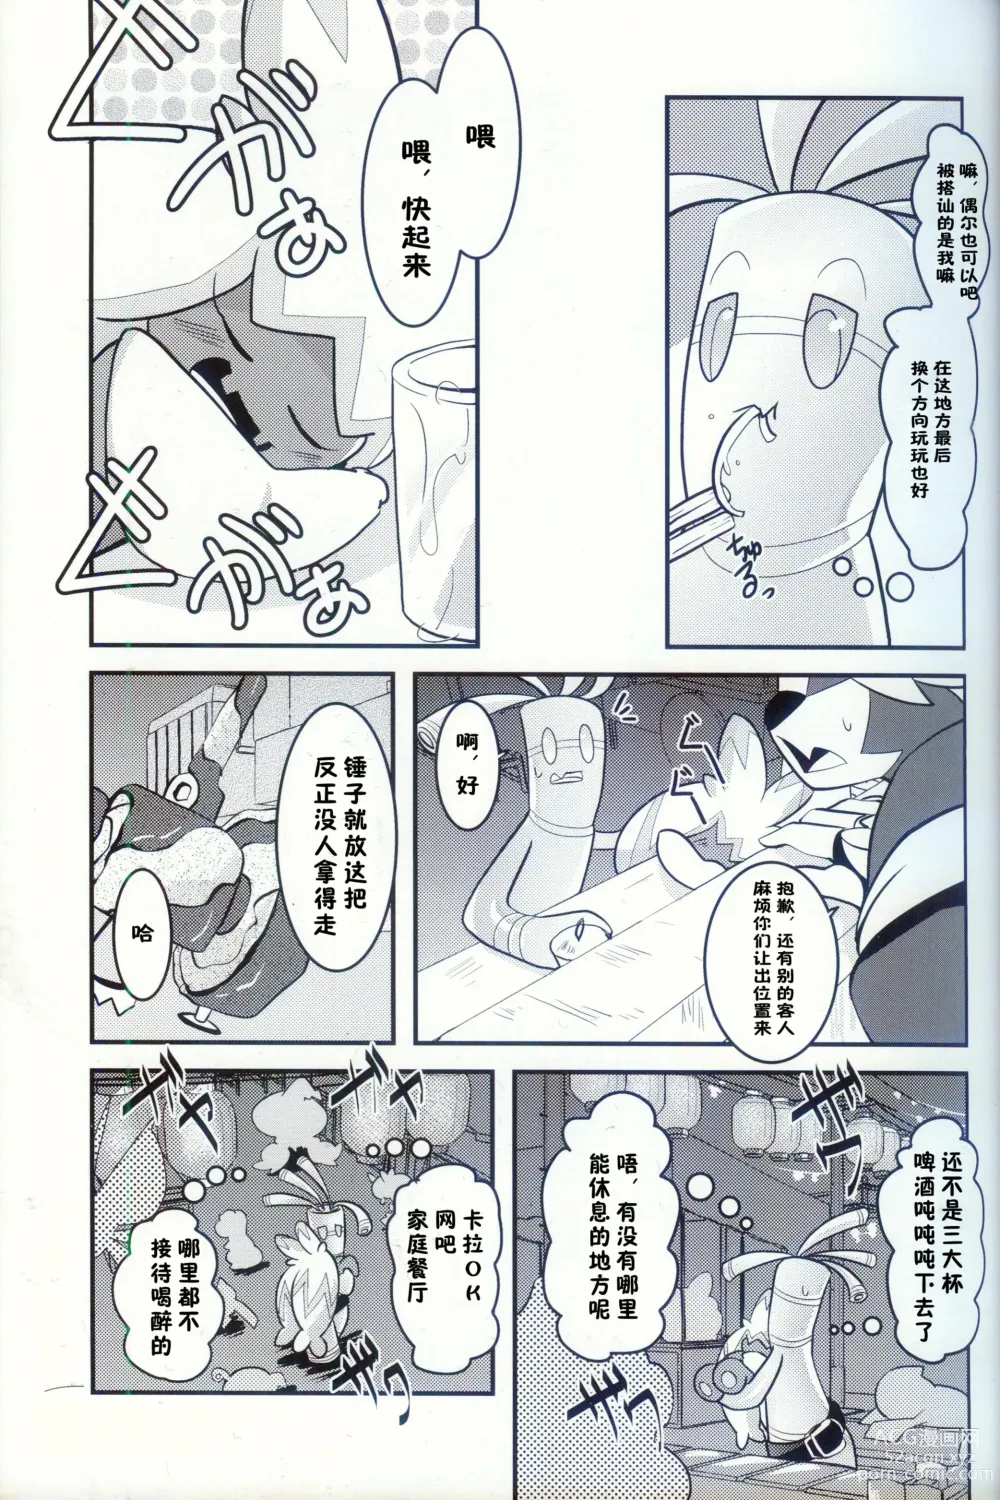 Page 8 of doujinshi 横滨的塞富豪巨锻匠